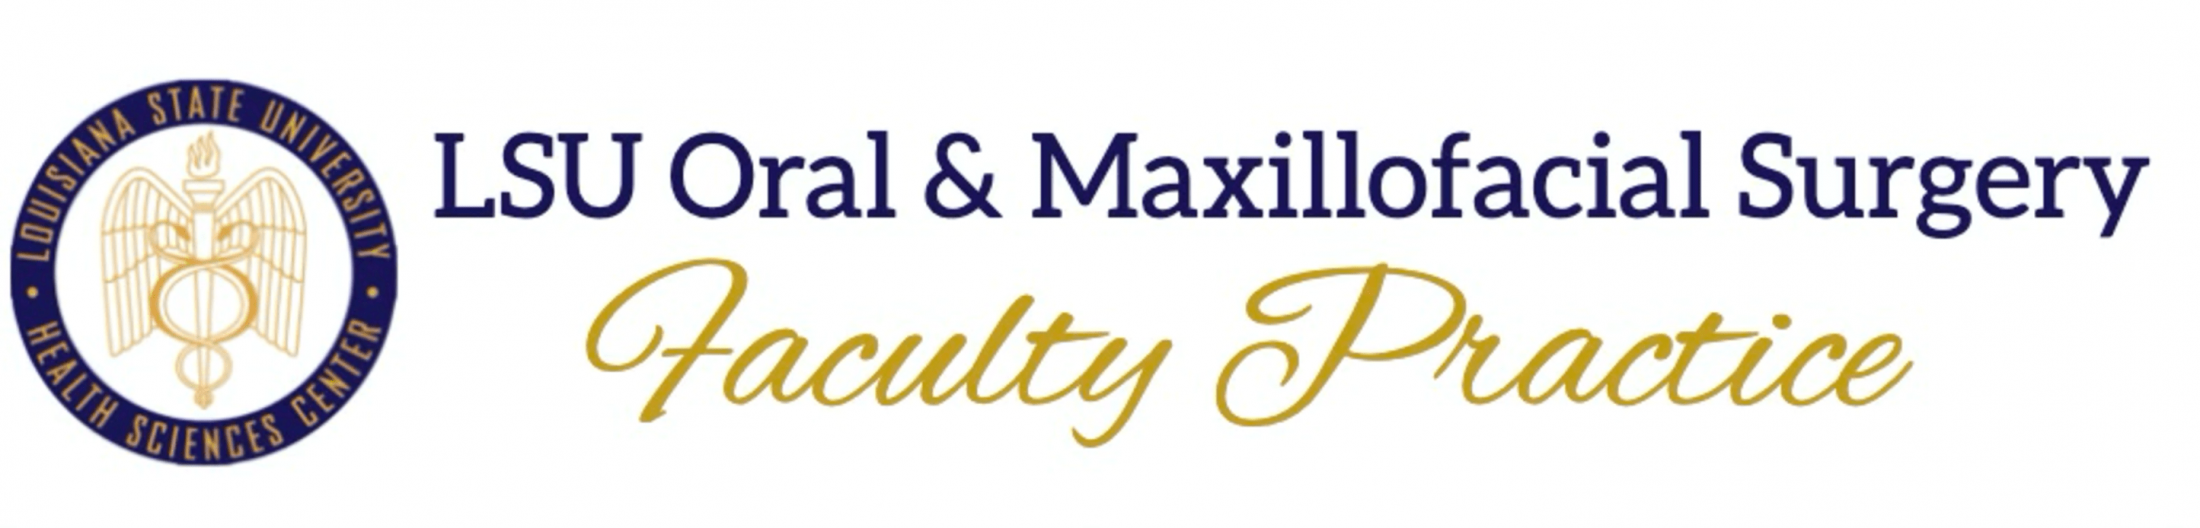 Link to LSU Oral and Maxillofacial Surgery: Faculty Practice home page